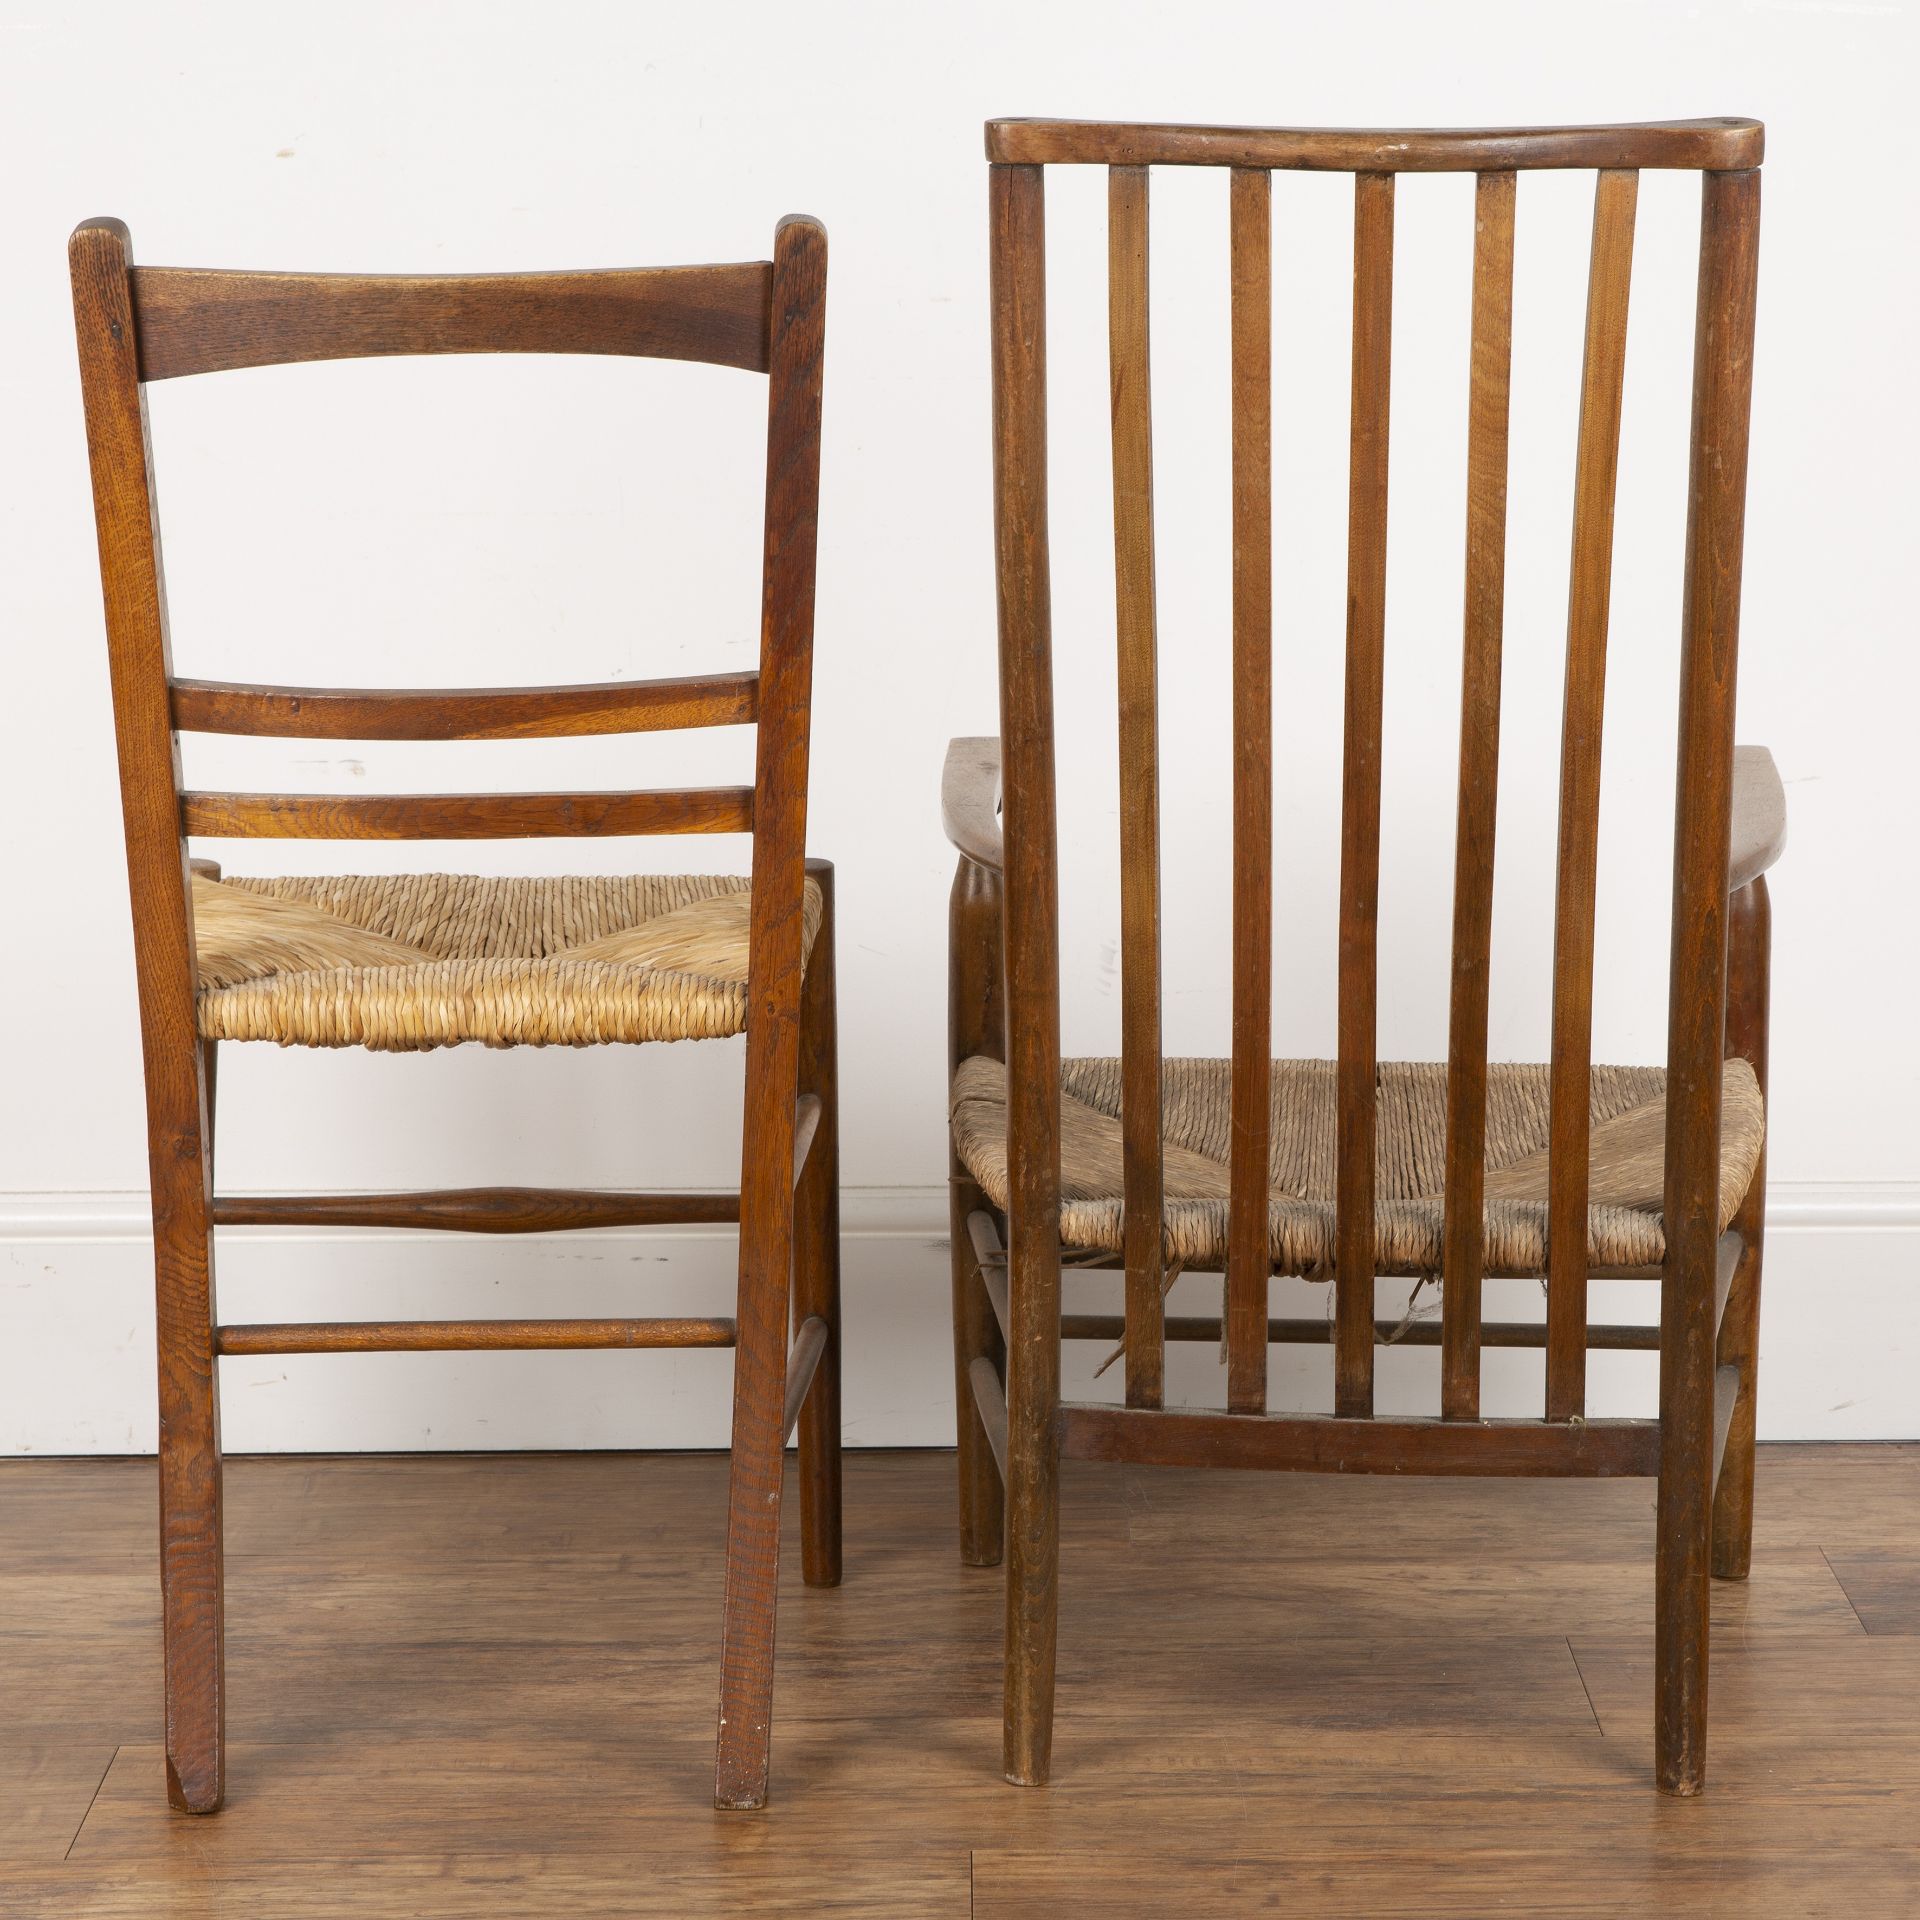 Arts and Crafts ash and elm, two small rush seated chairs, one low example with vertical splats on - Image 4 of 4